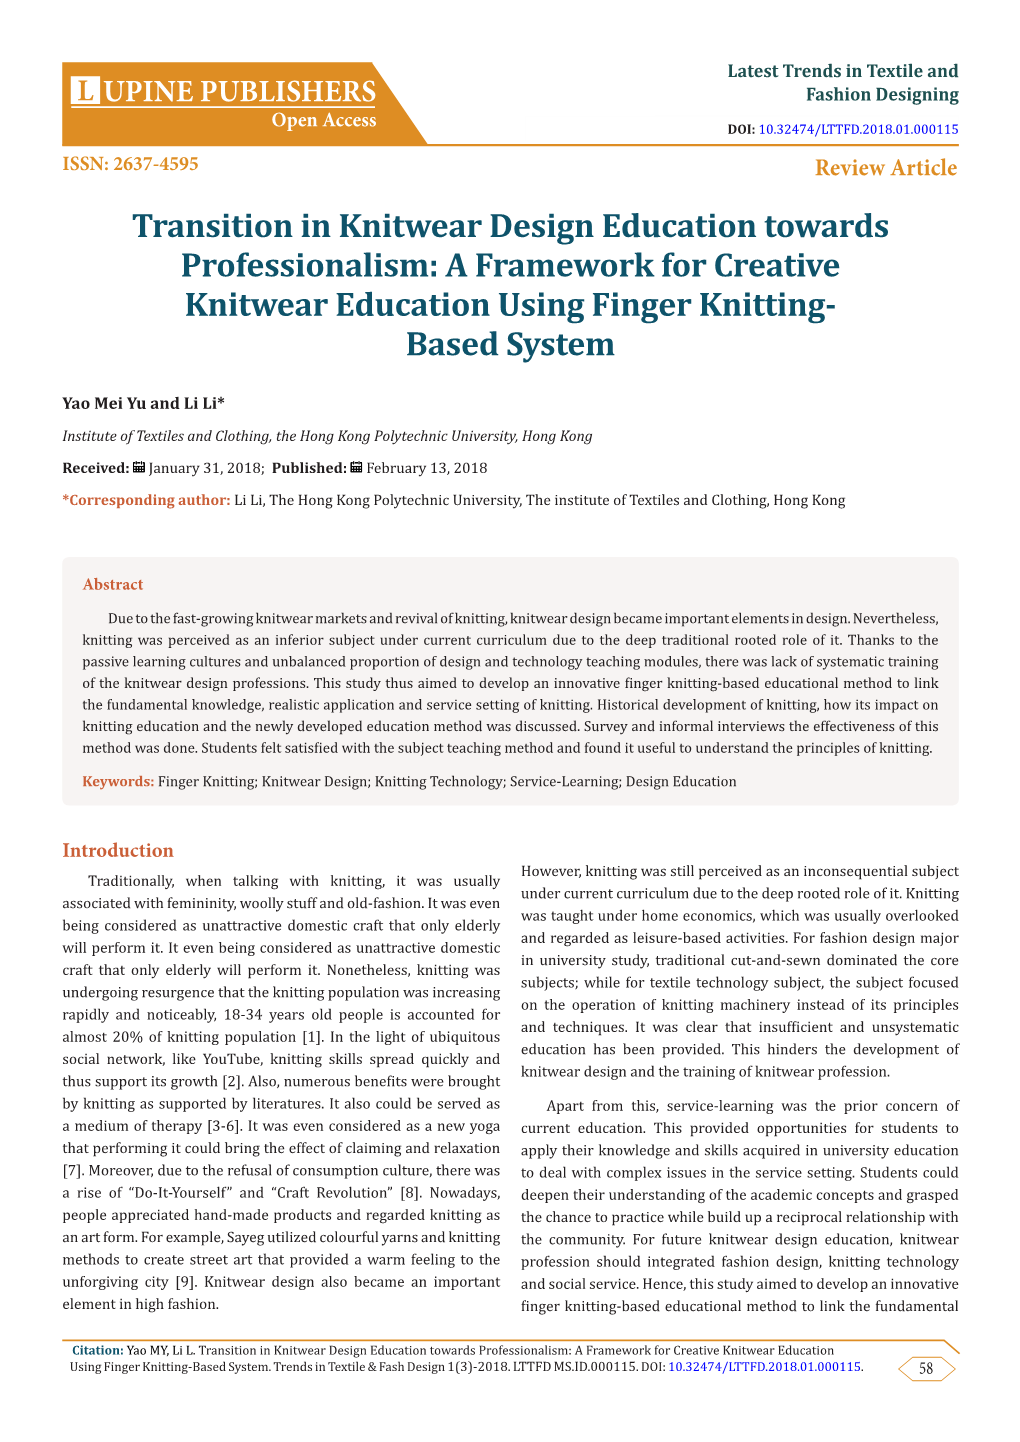 Transition in Knitwear Design Education Towards Professionalism: a Framework for Creative Knitwear Education Using Finger Knitting- Based System